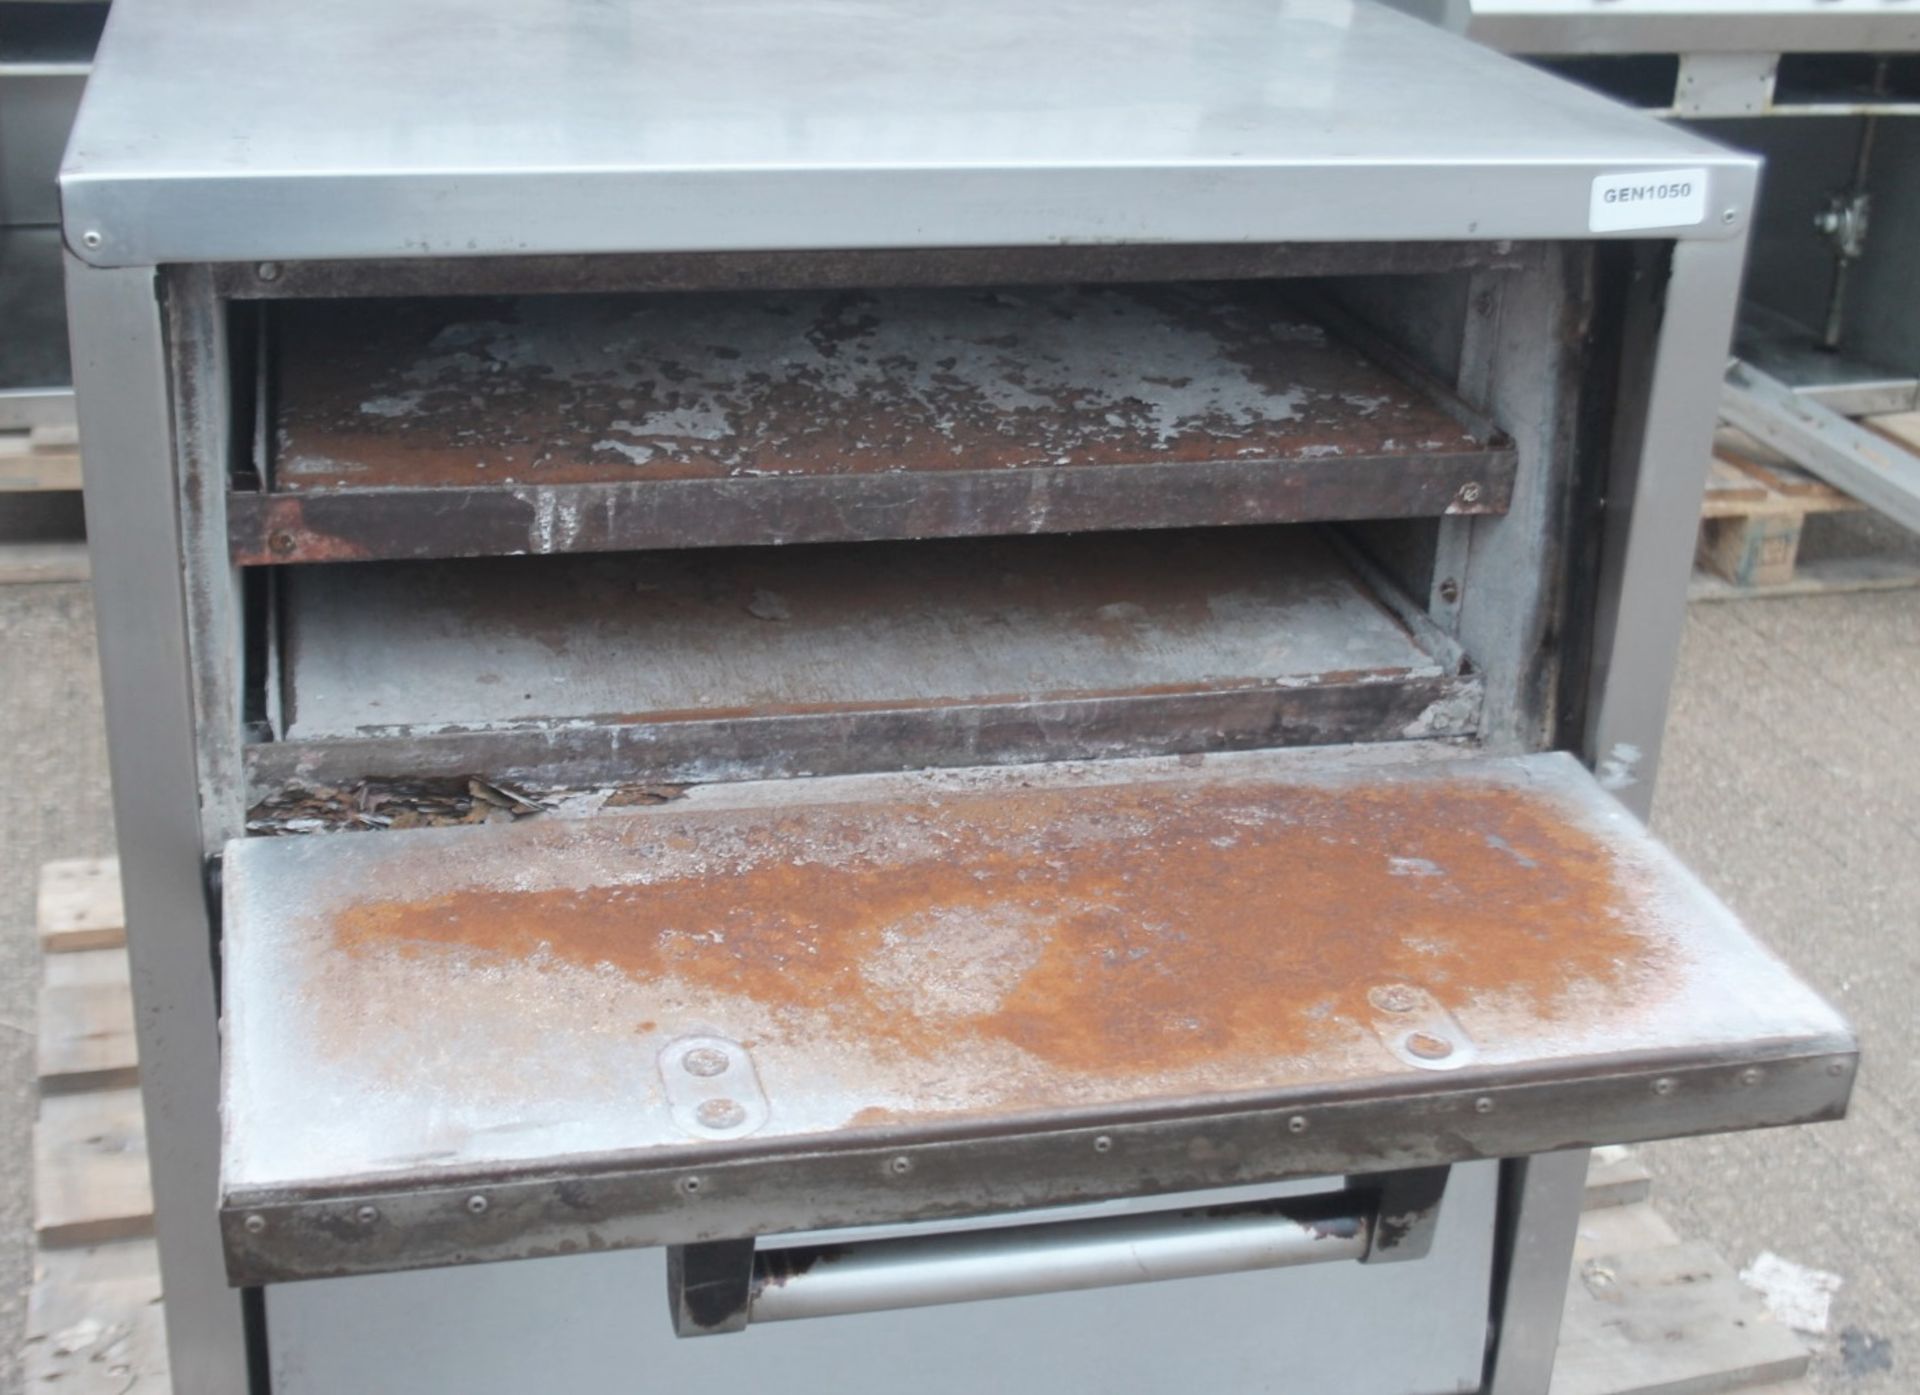 1 x Bakers Pride Three Deck Commercial Electric Pizza Oven - CL805 - Location: Altrincham - Image 6 of 7